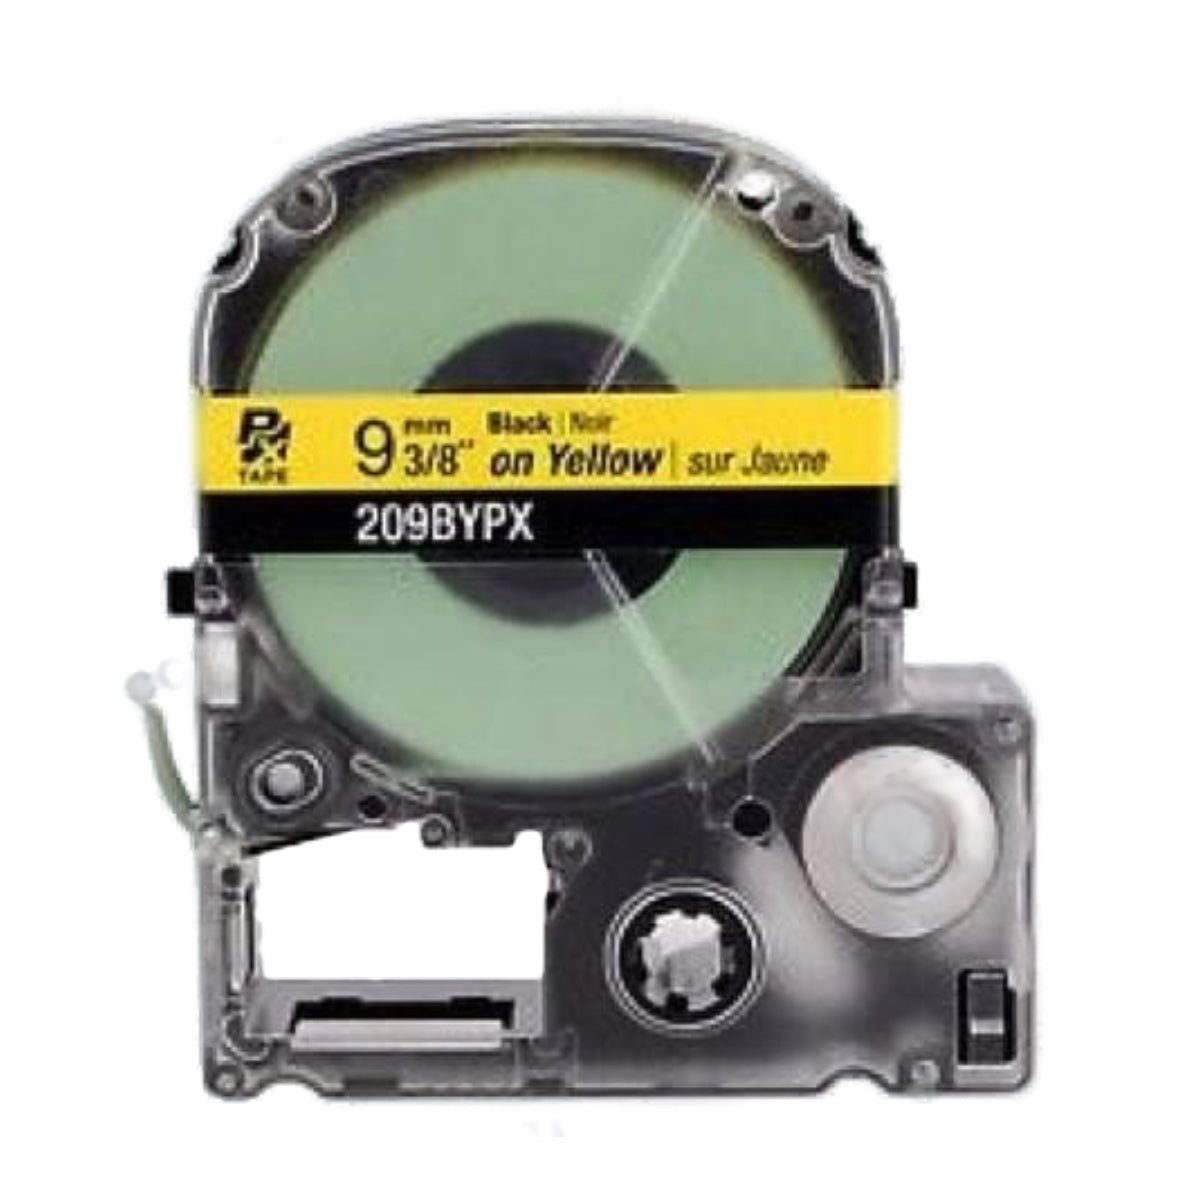 Epson LABELWORKS PX 9mm 209BYPX Tape, Black on Yellow